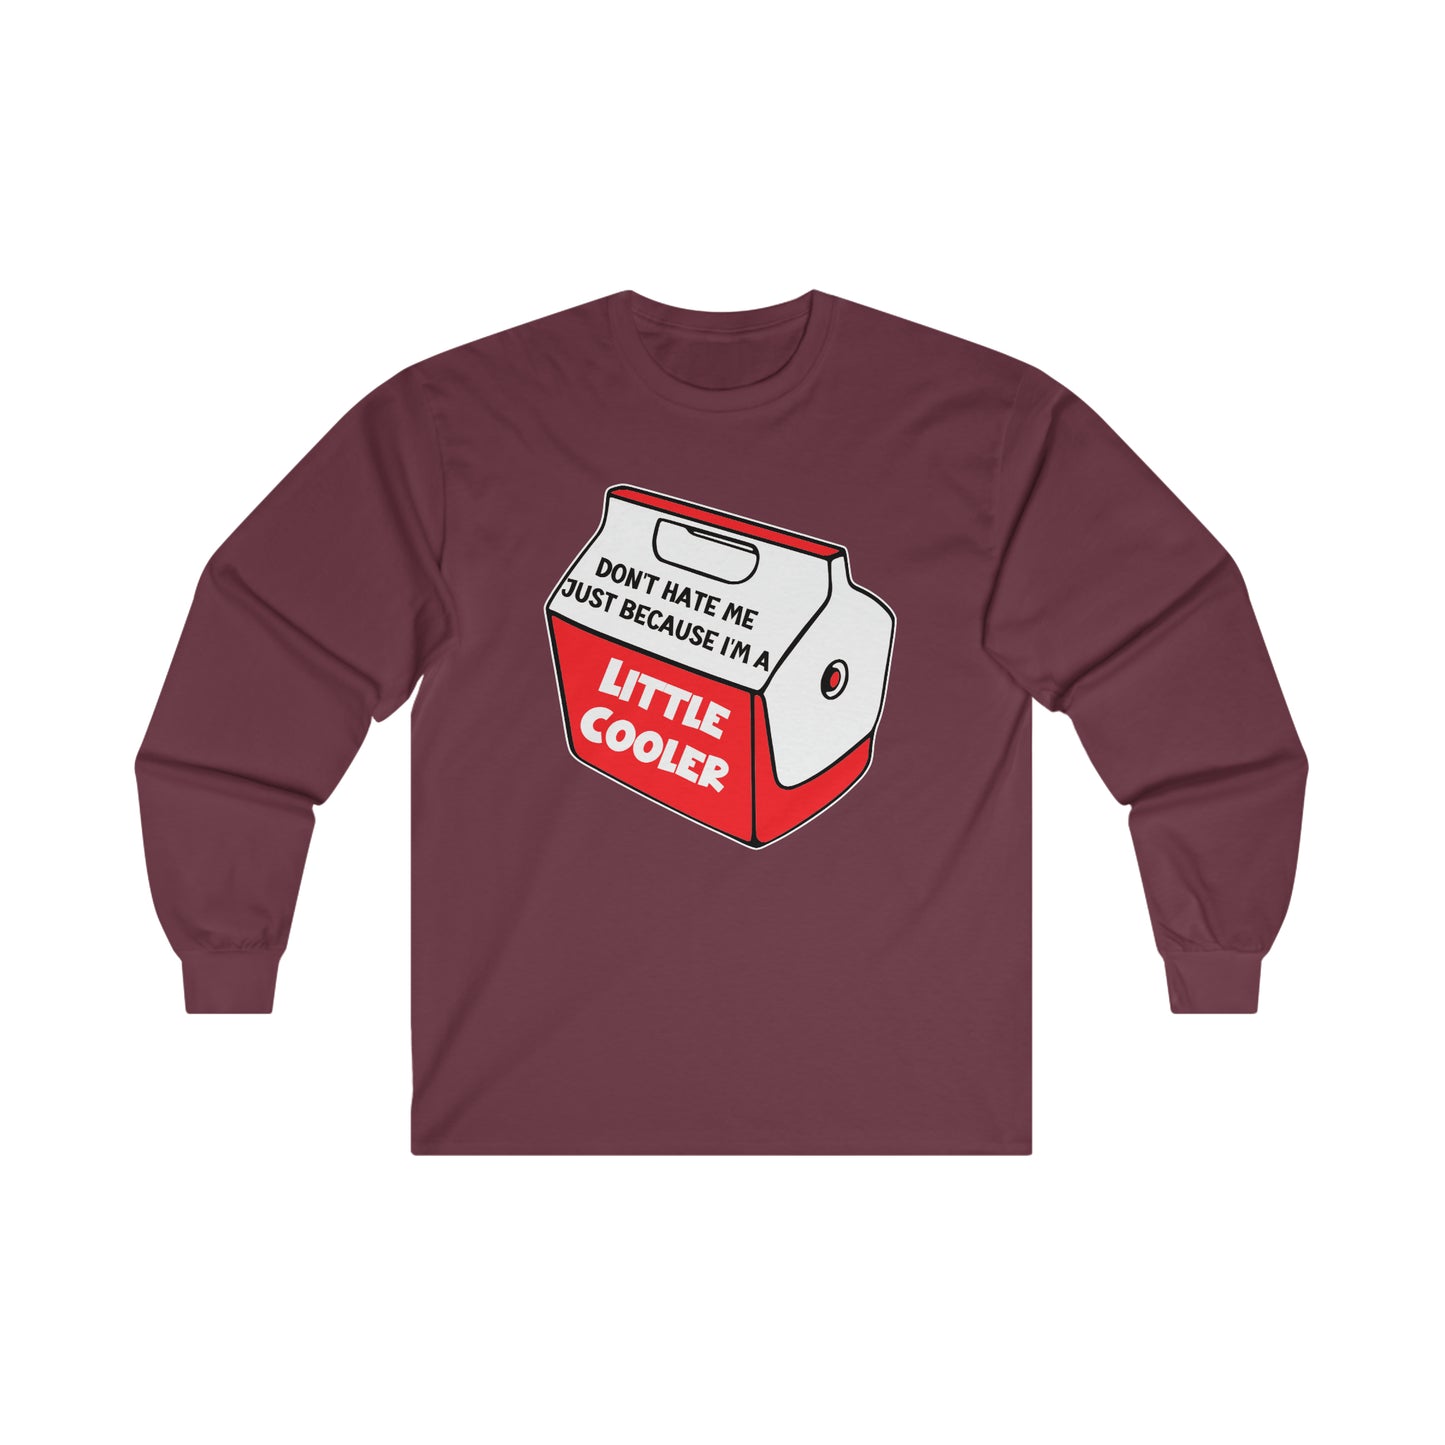 Don't Hate Me Because I'm A Little Cooler: Ultra Cotton Long Sleeve Tee